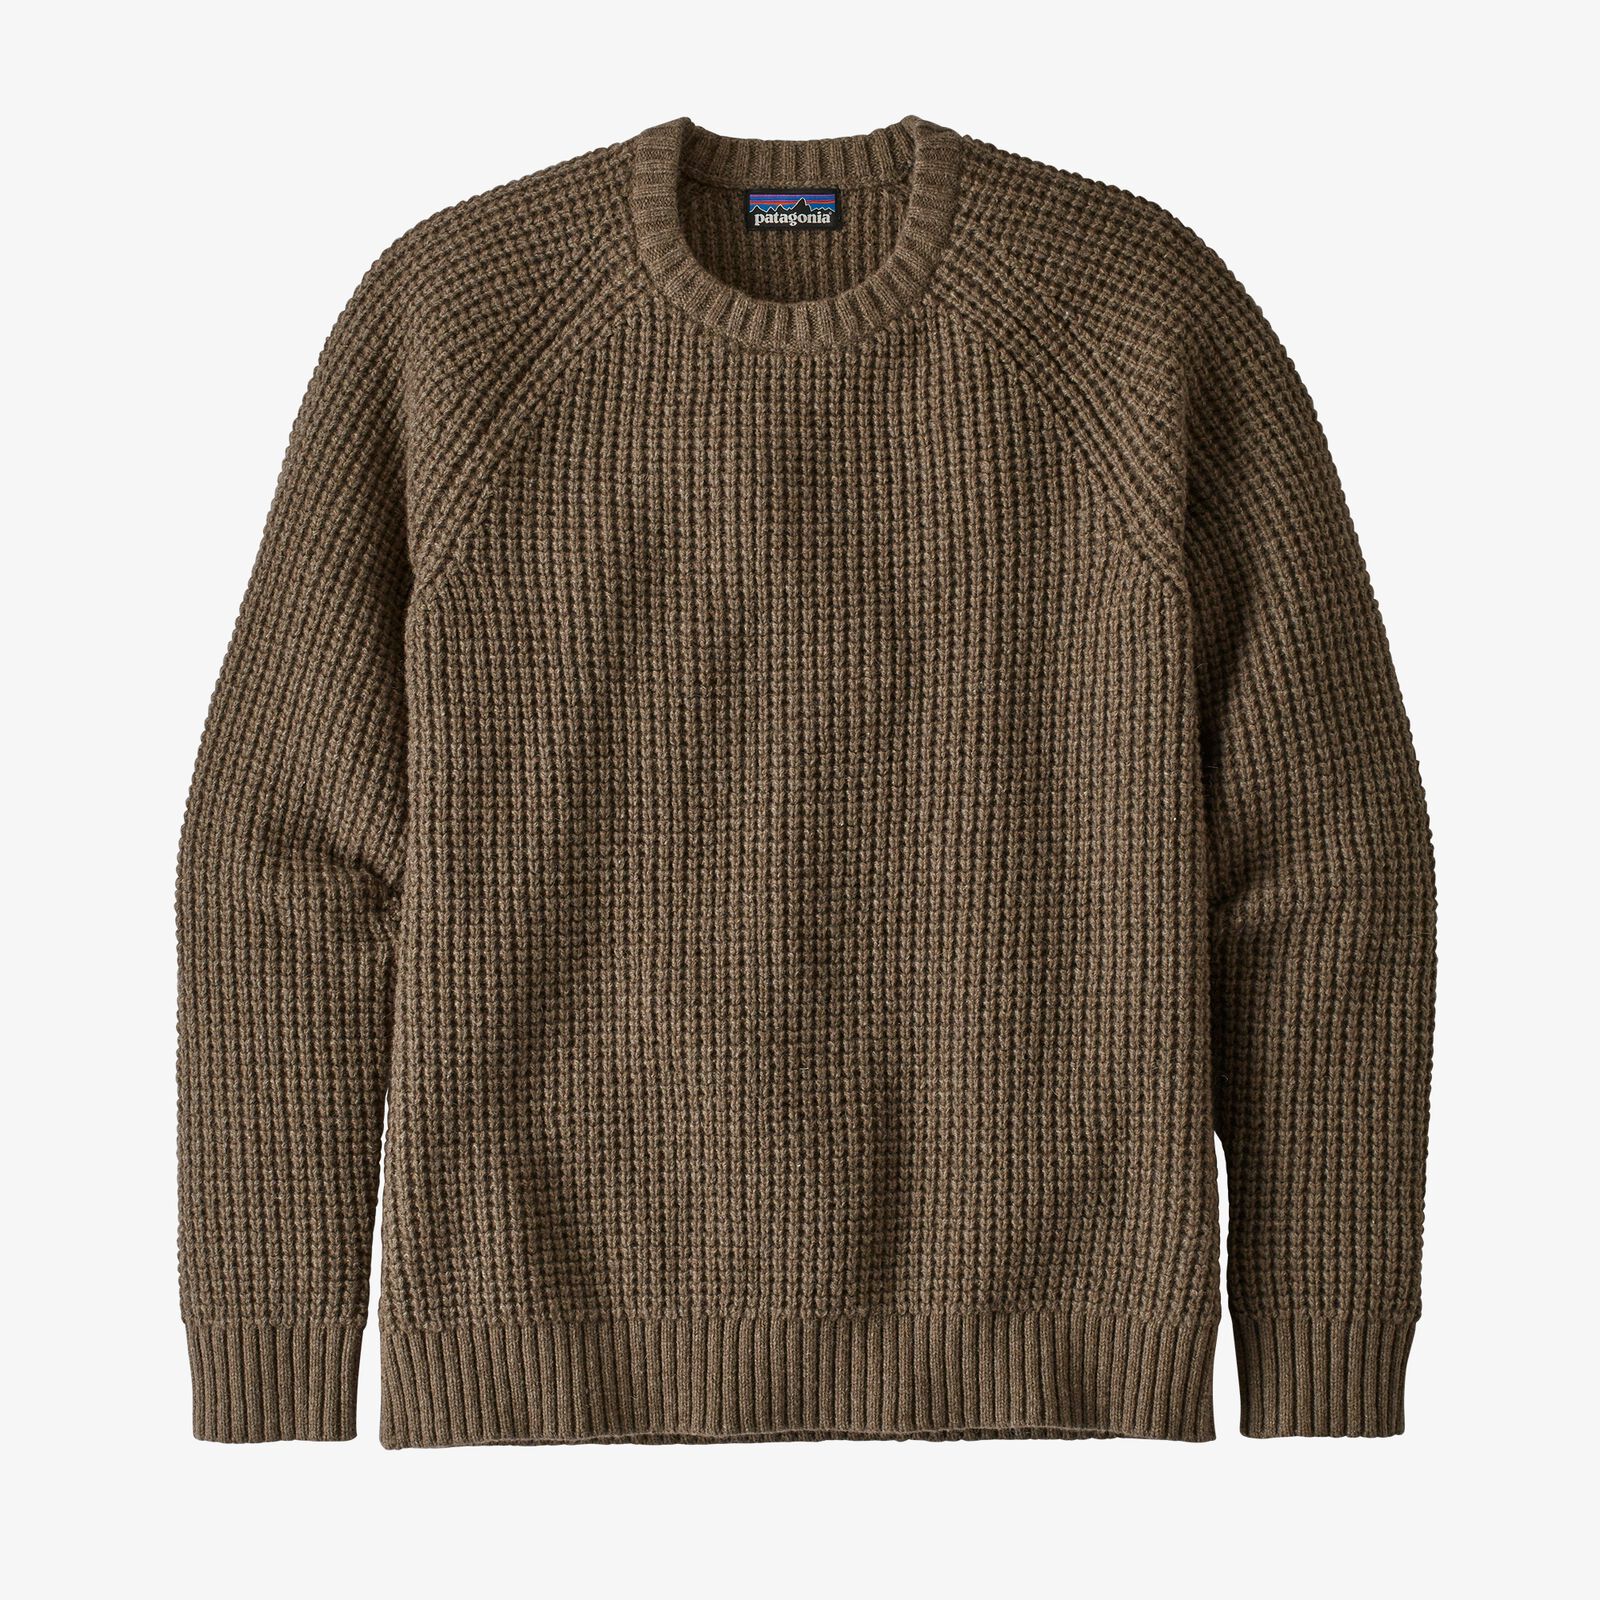 Patagonia Men's Recycled Wool Waffle Knit Sweater